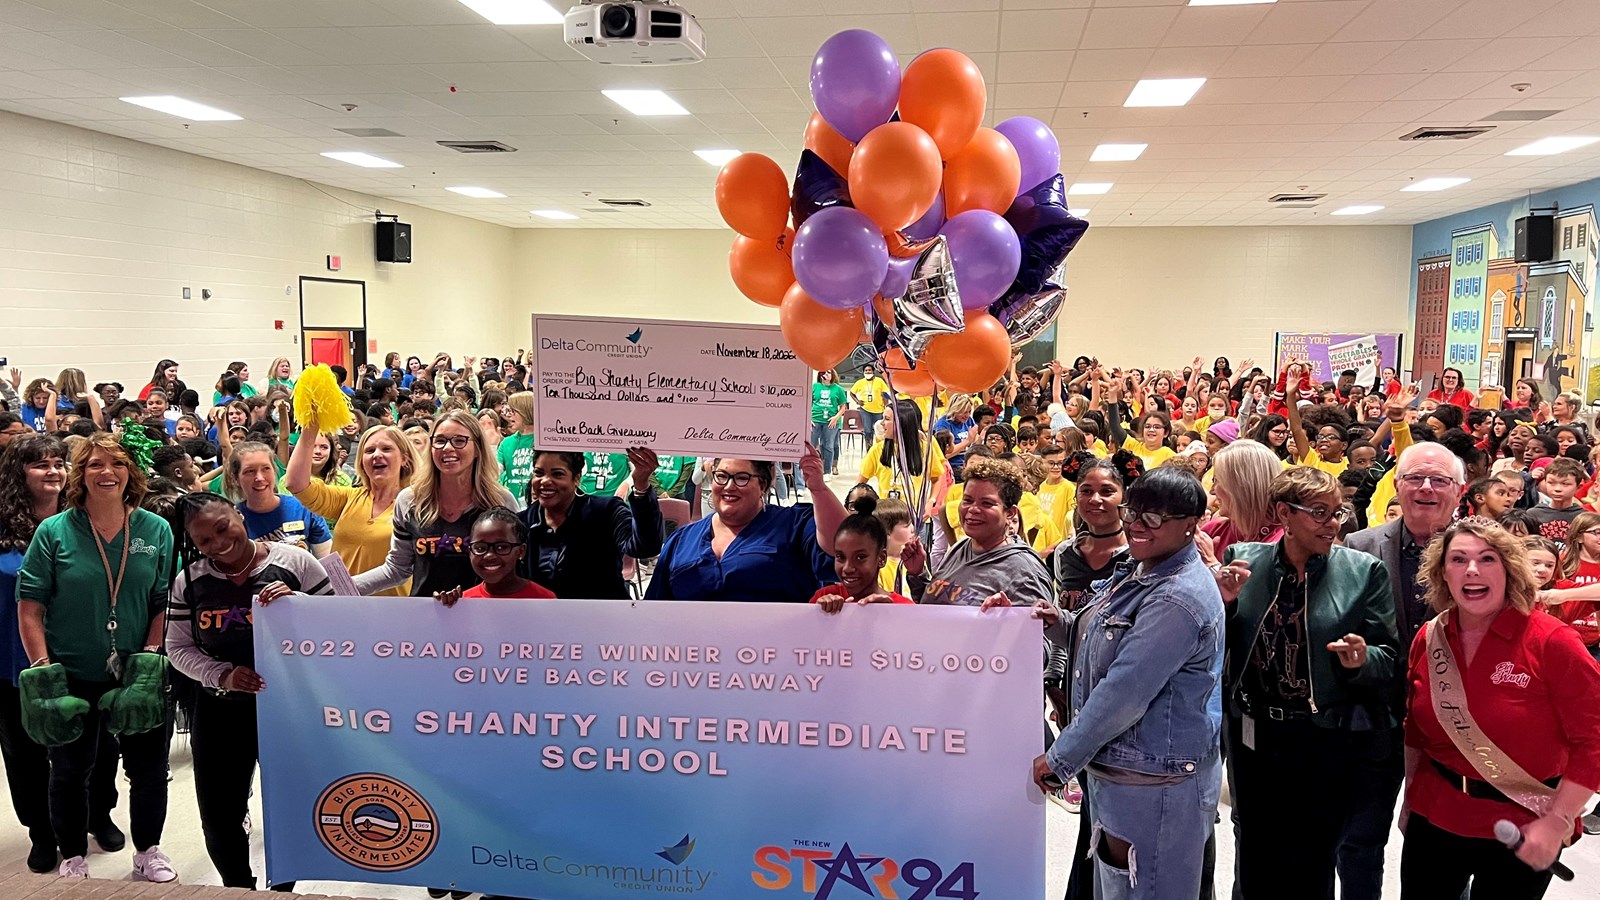 Big Shanty Intermediate School wins Grand Prize for Give Back Give Away from Delta Community Credit Union and Star 94